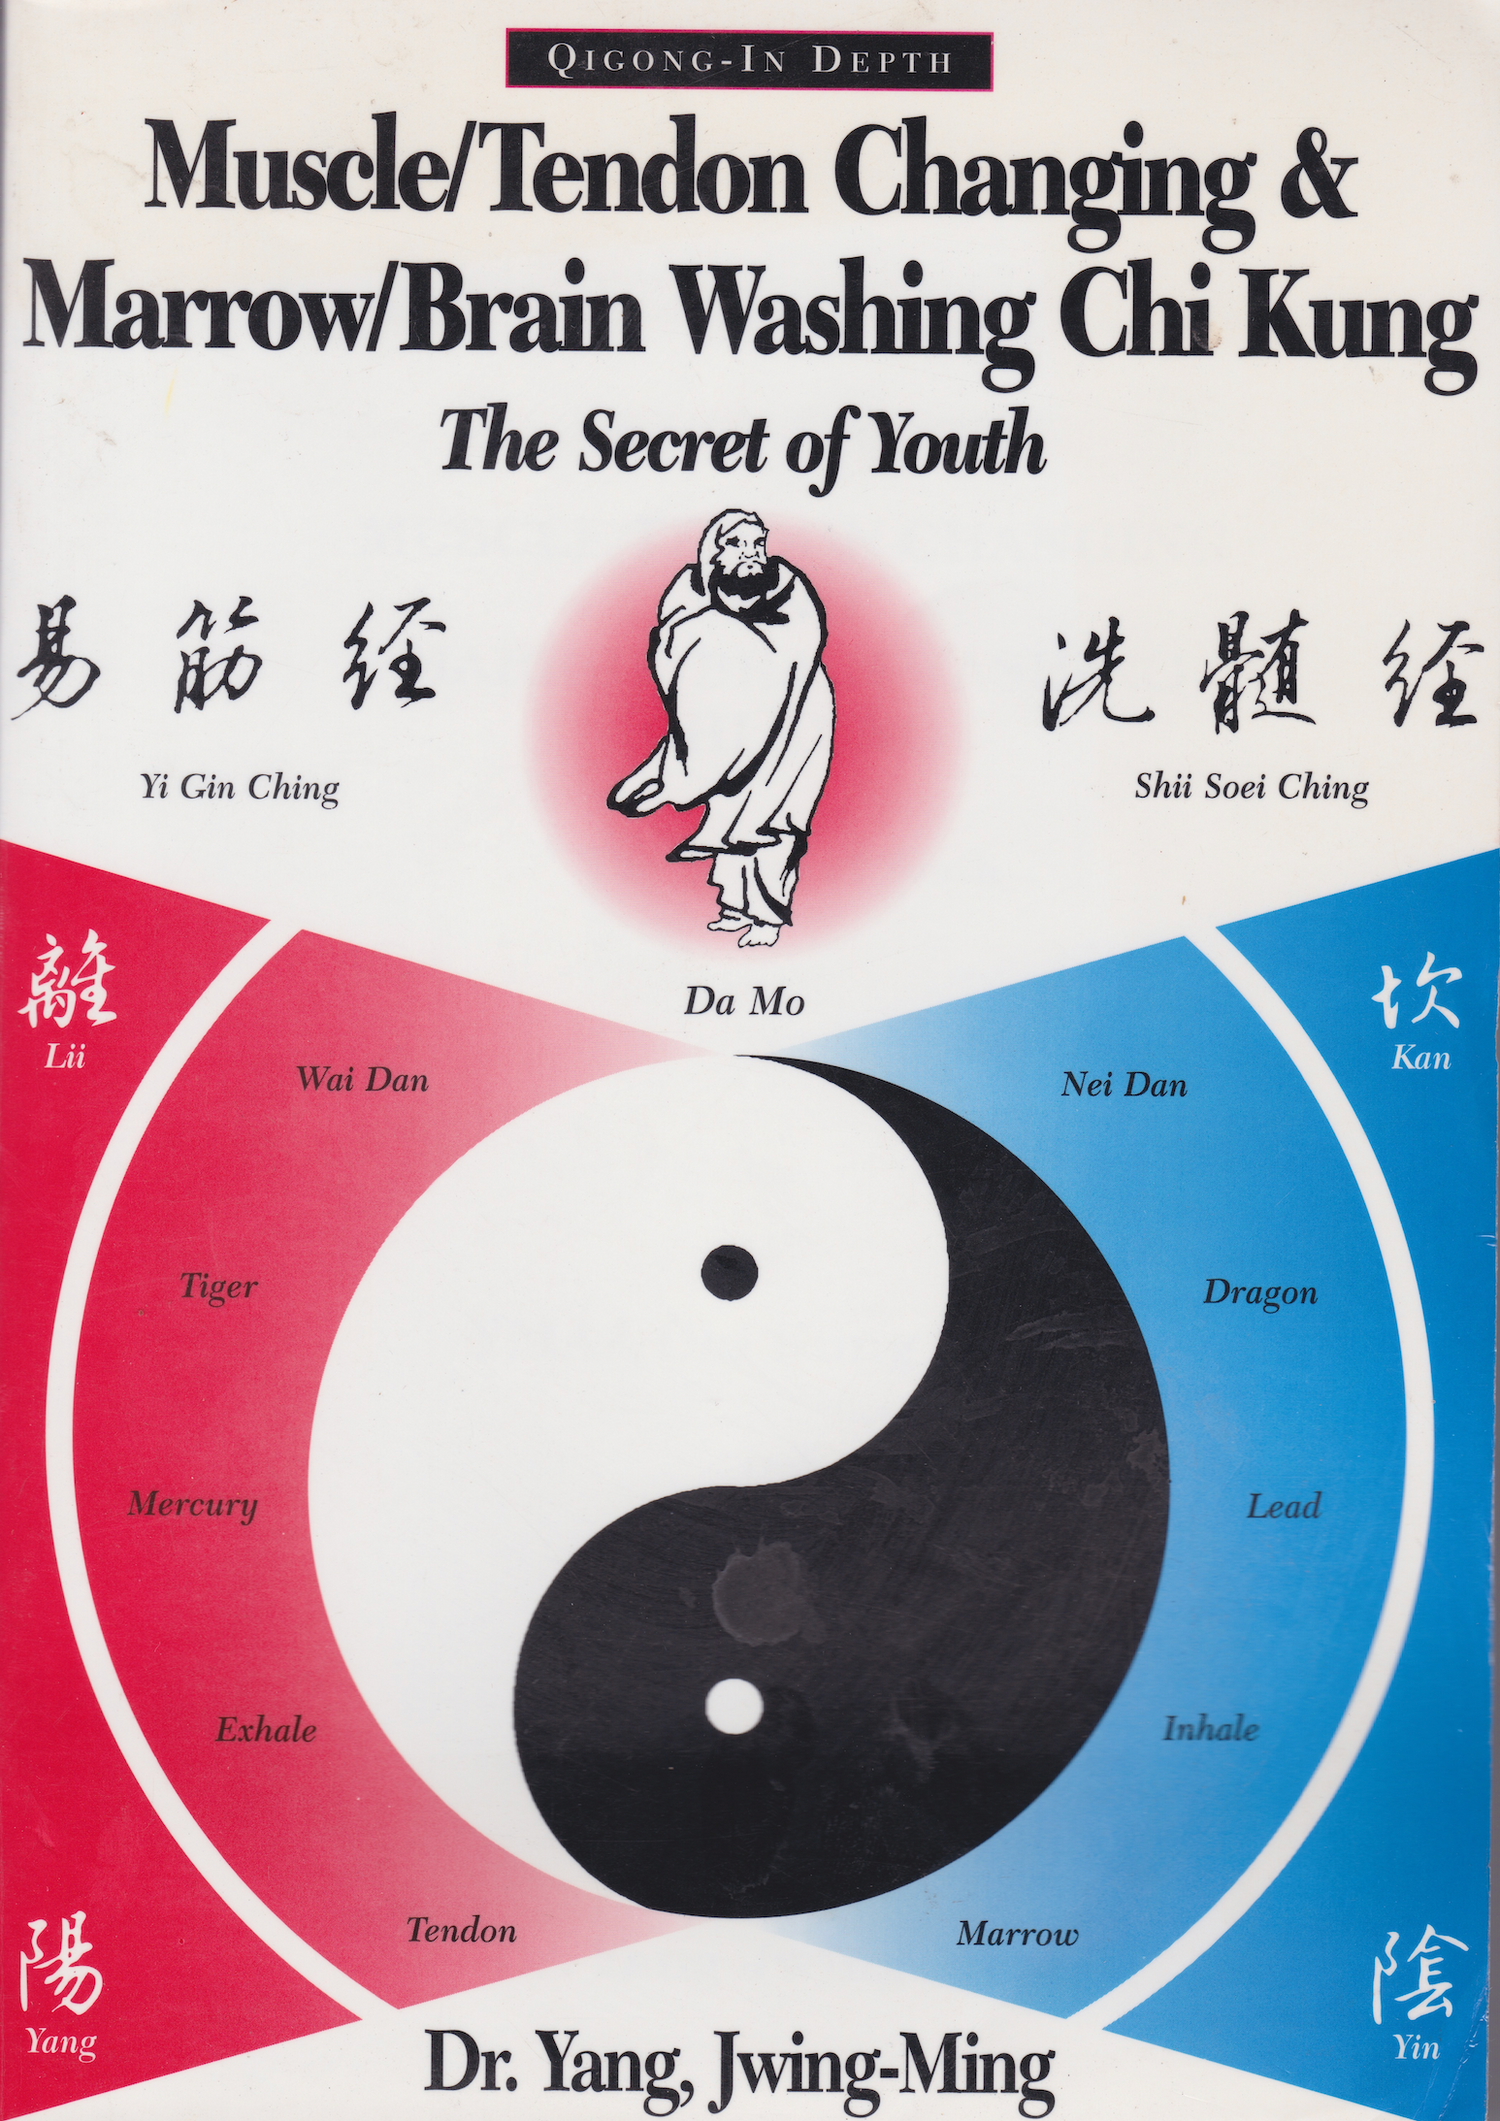 Muscle/Tendon Changing and Marrow/Brain Washing Chi Kung: The Secret of Youth Book by Dr Yang, Jwing-Ming (Preowned)